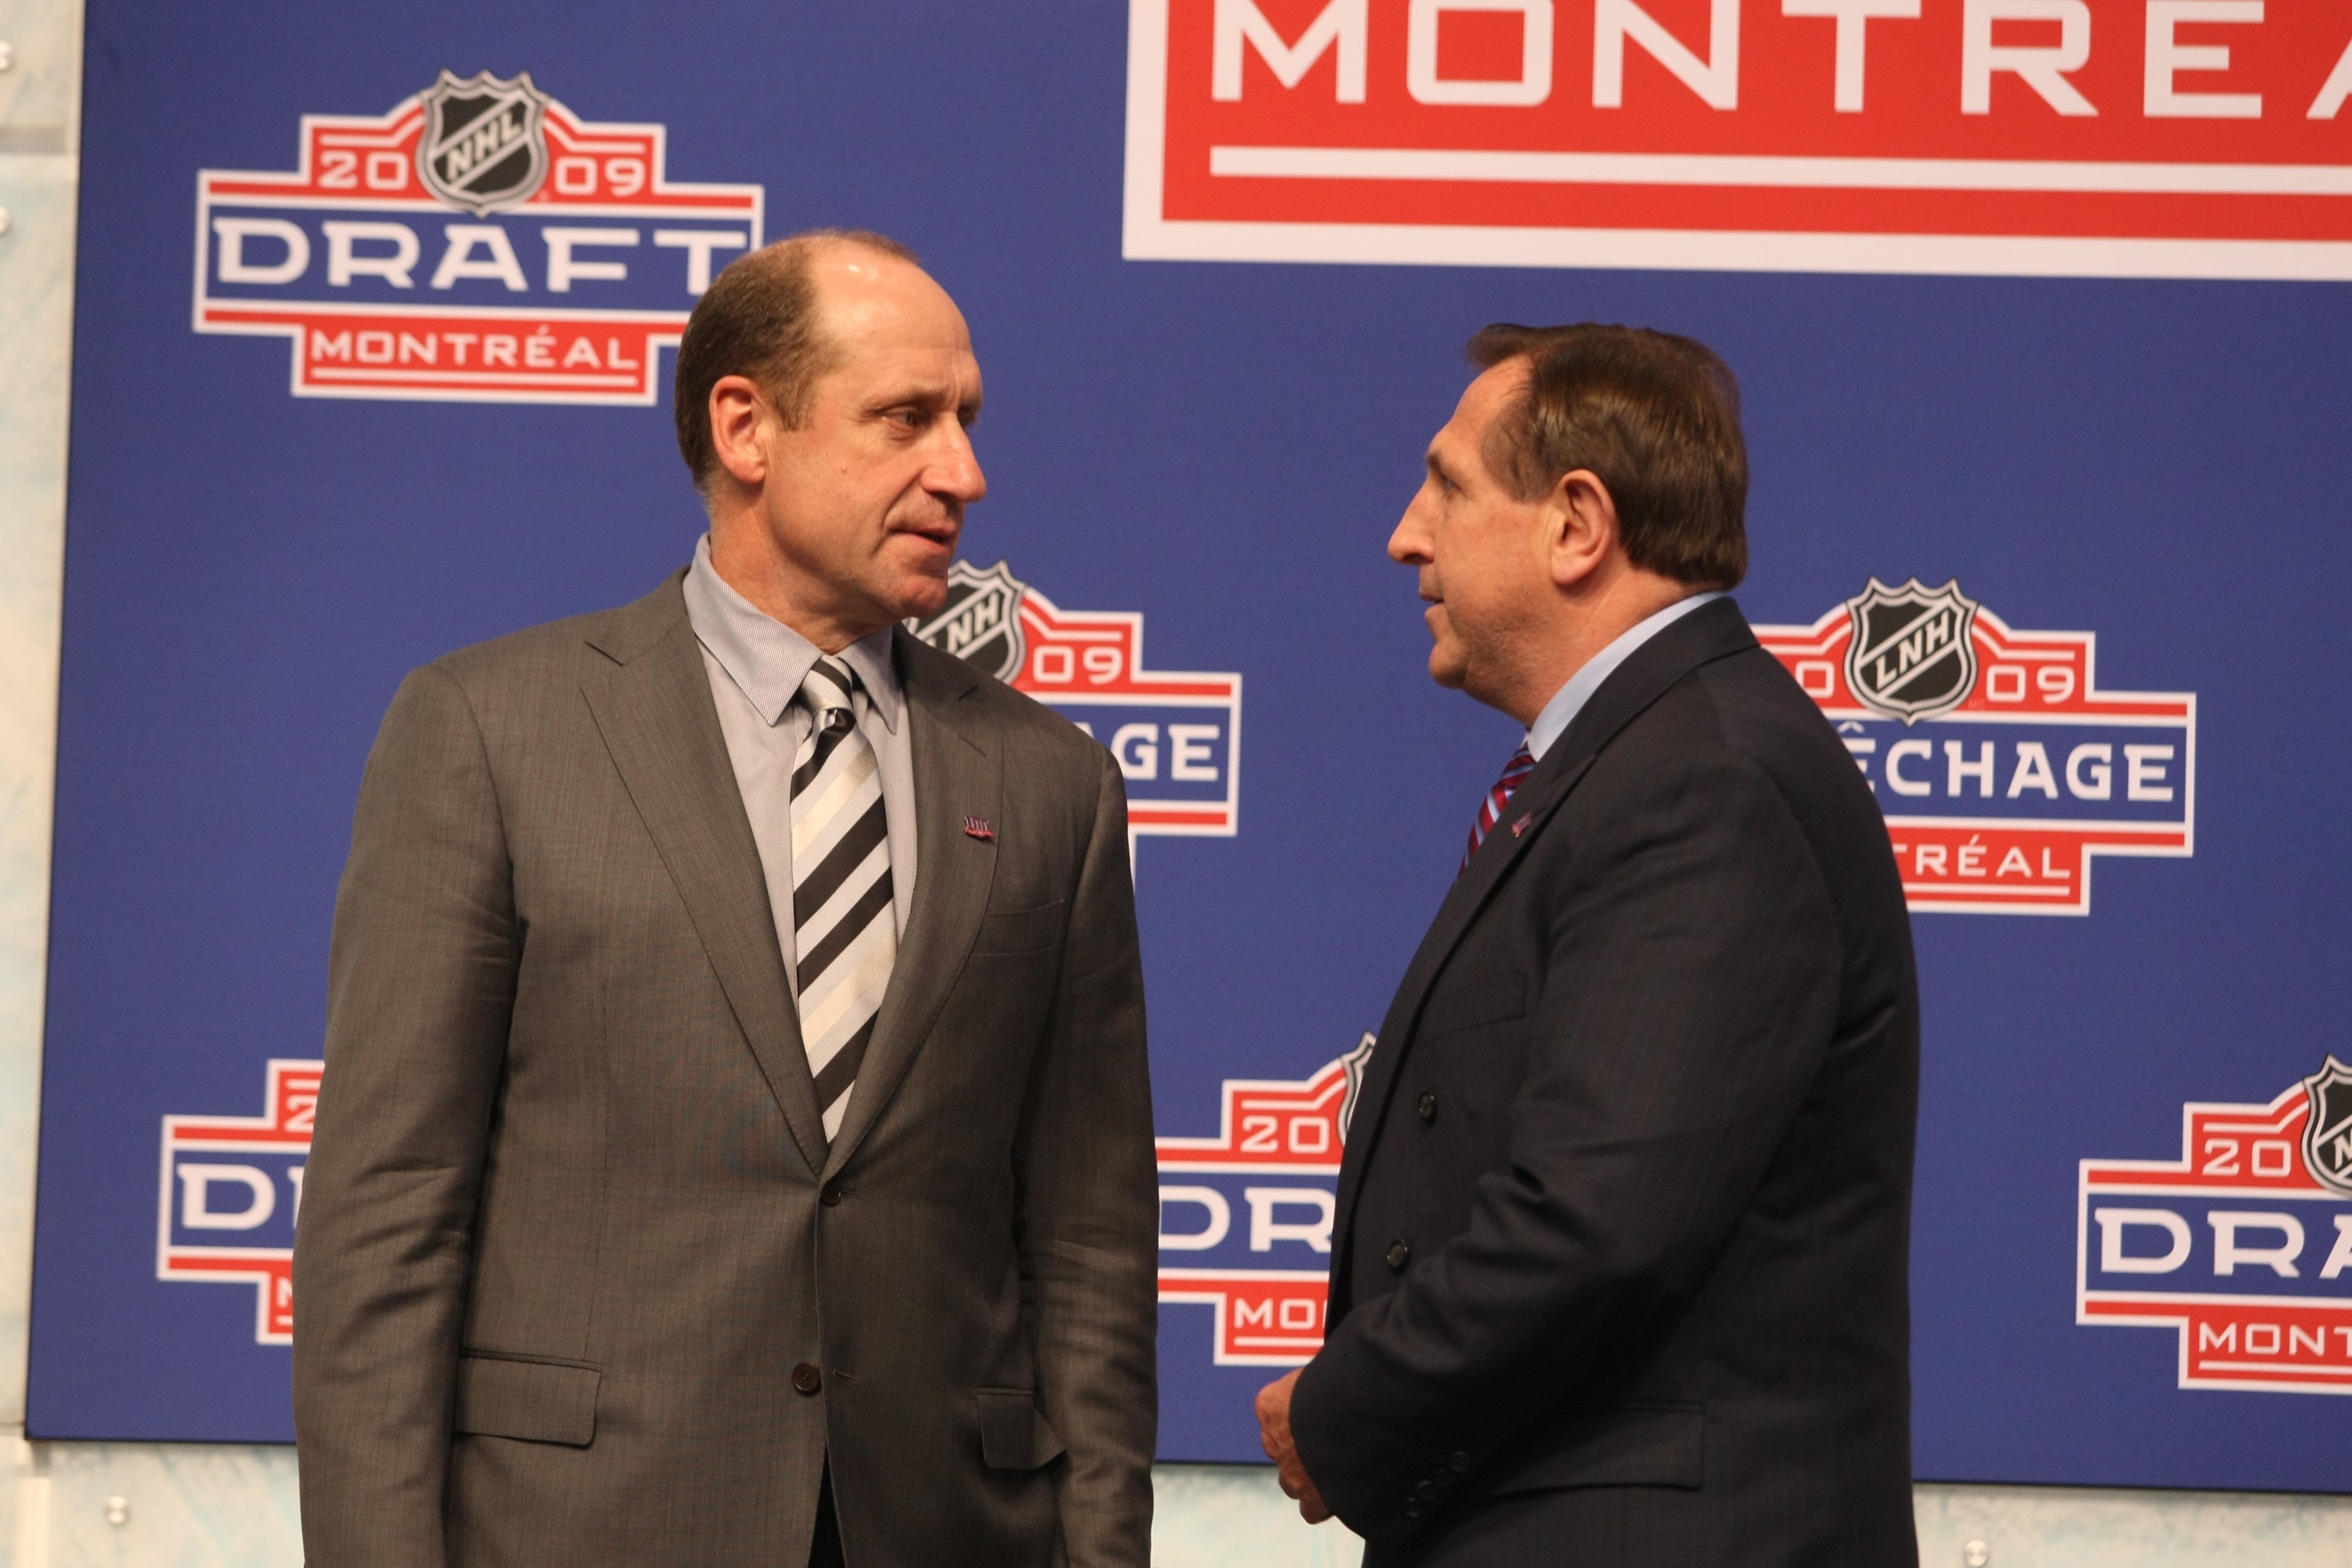 MONTREAL - JUNE 26:  Executive Vice President and General Manager Bob Gainey of the Montreal Canadiens speaks with head coach Jacques Martin during the first round of the 2009 NHL Entry Draft at the Bell Centre on June 26, 2009 in Montreal, Quebec, Canada